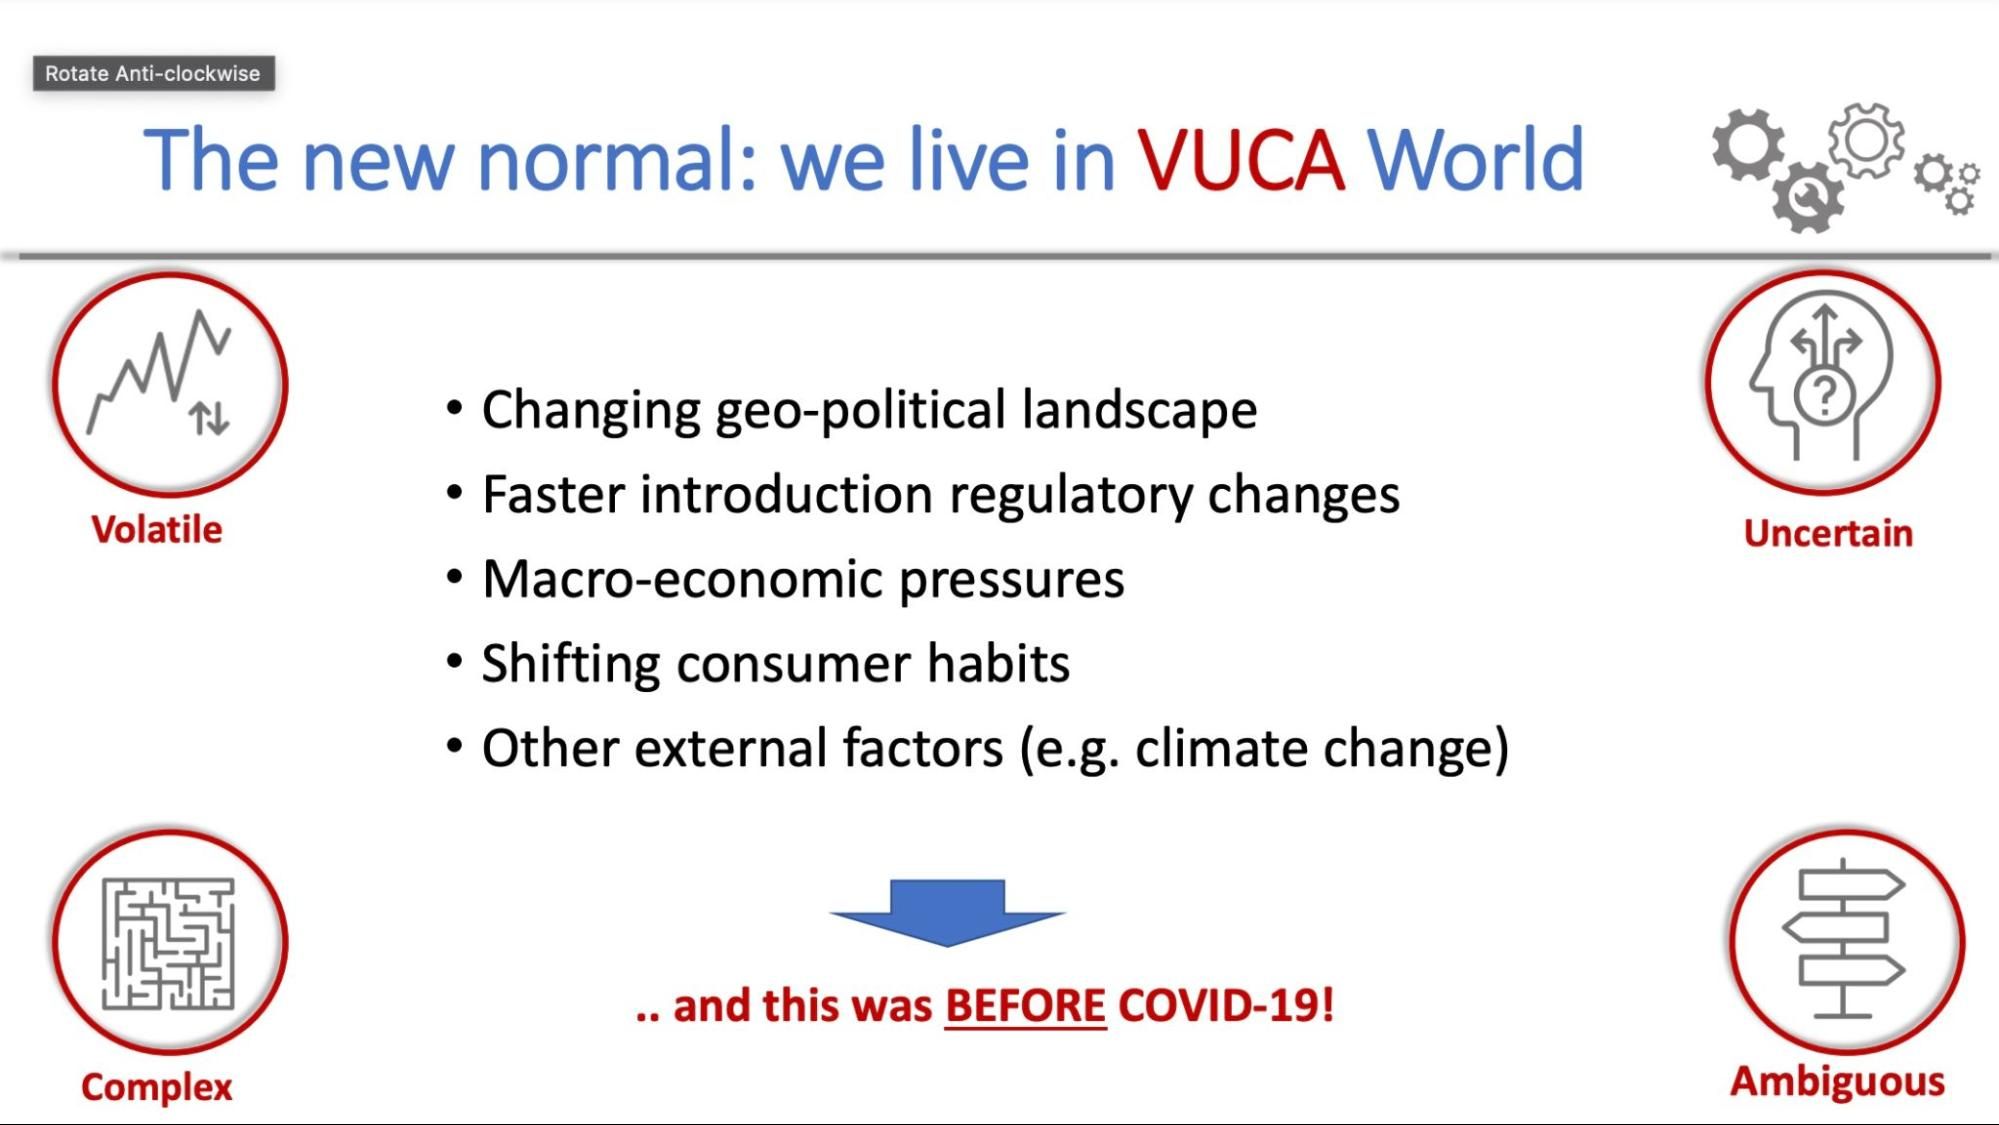 we live in a VUCE world